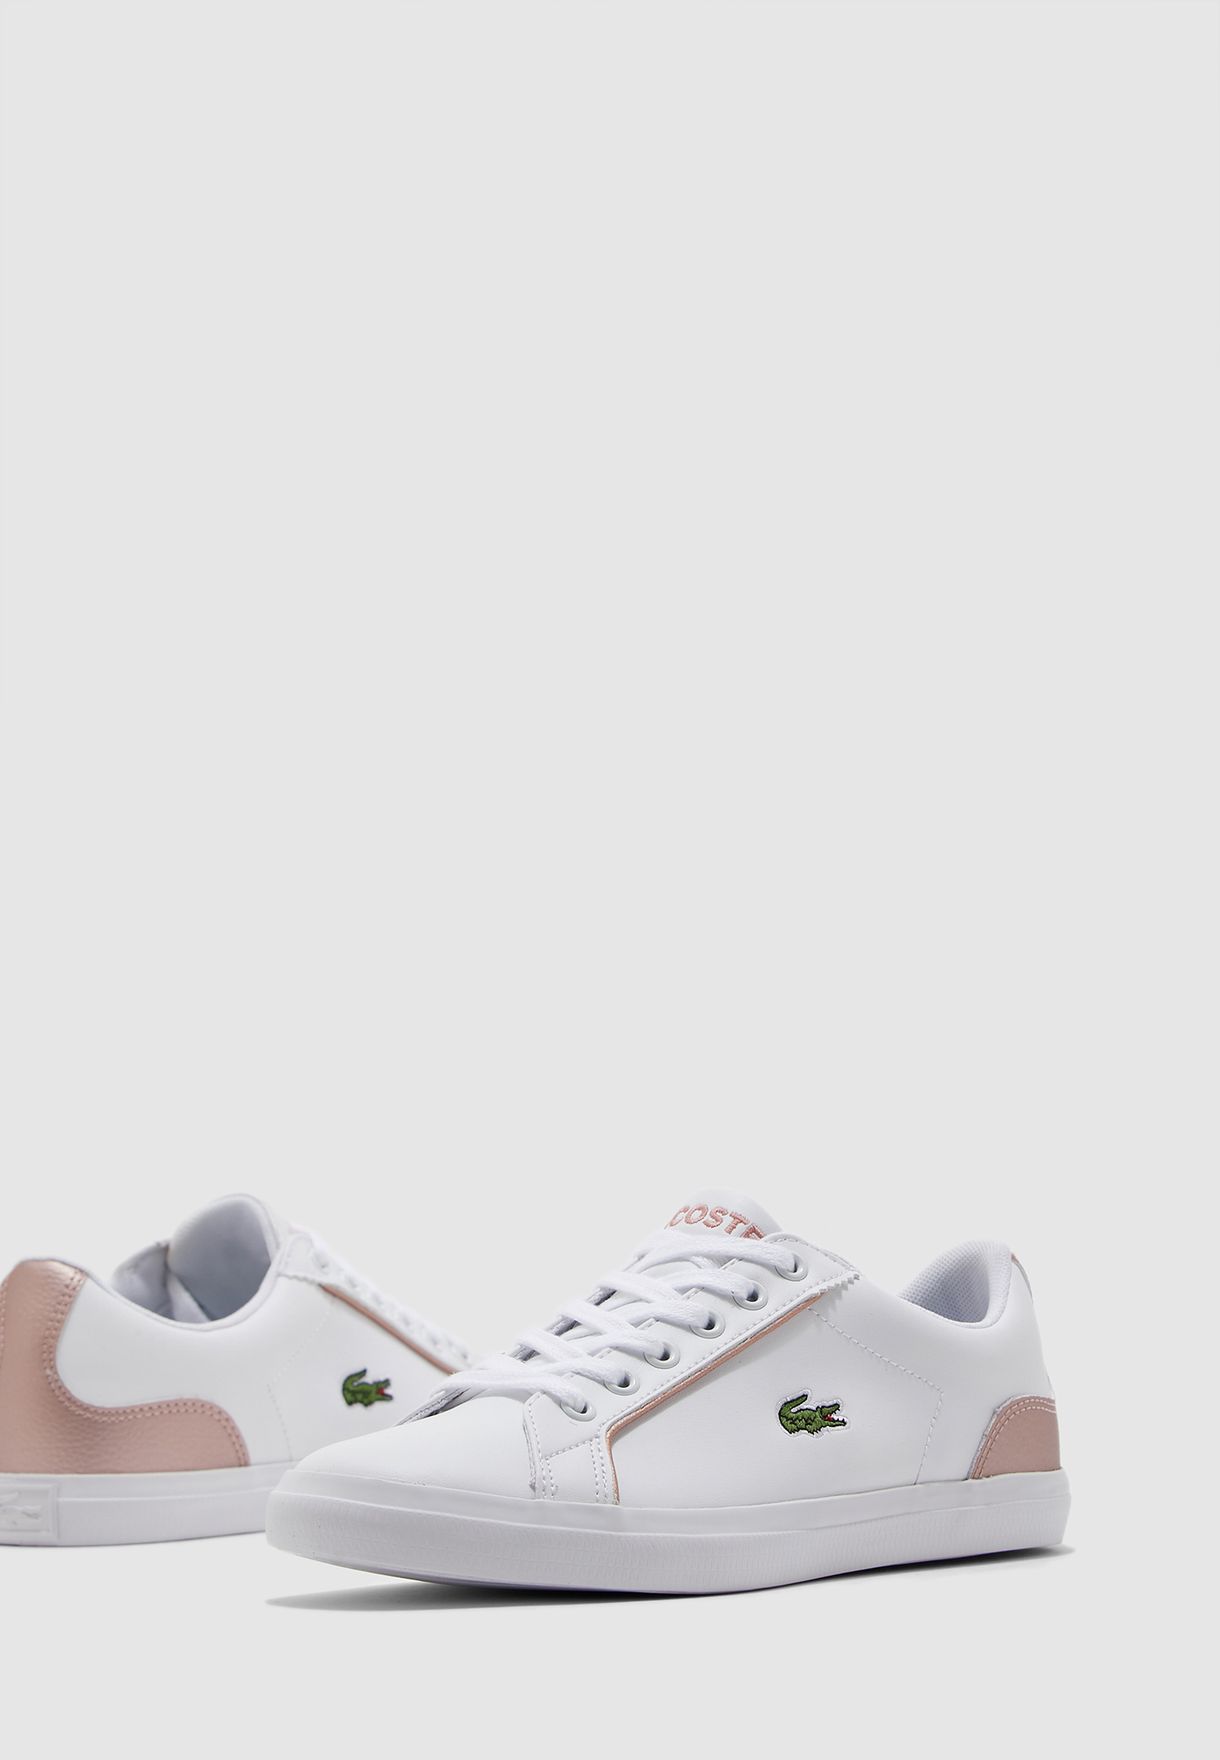 Junior Girls Lacoste Lerond 319 Trainers In White Black